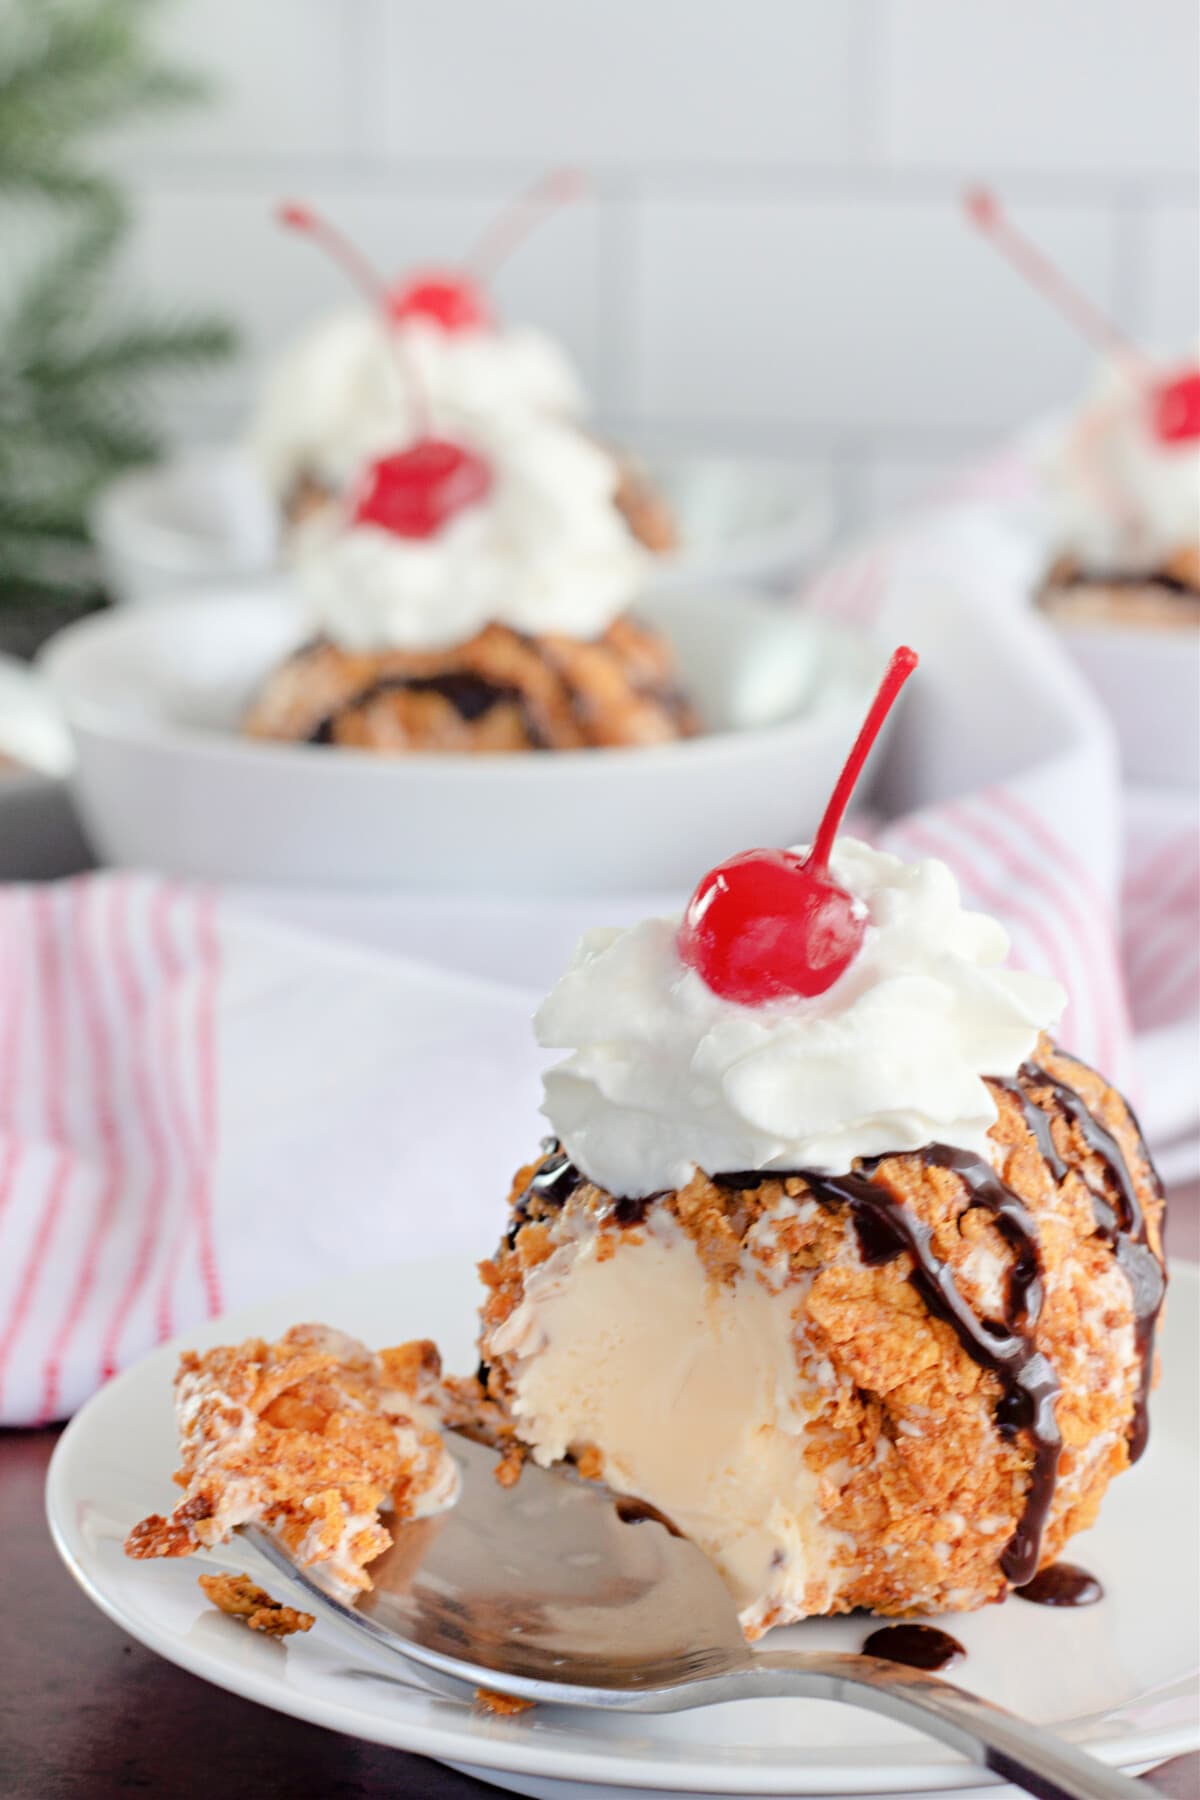 Fried Ice Cream with a spoon